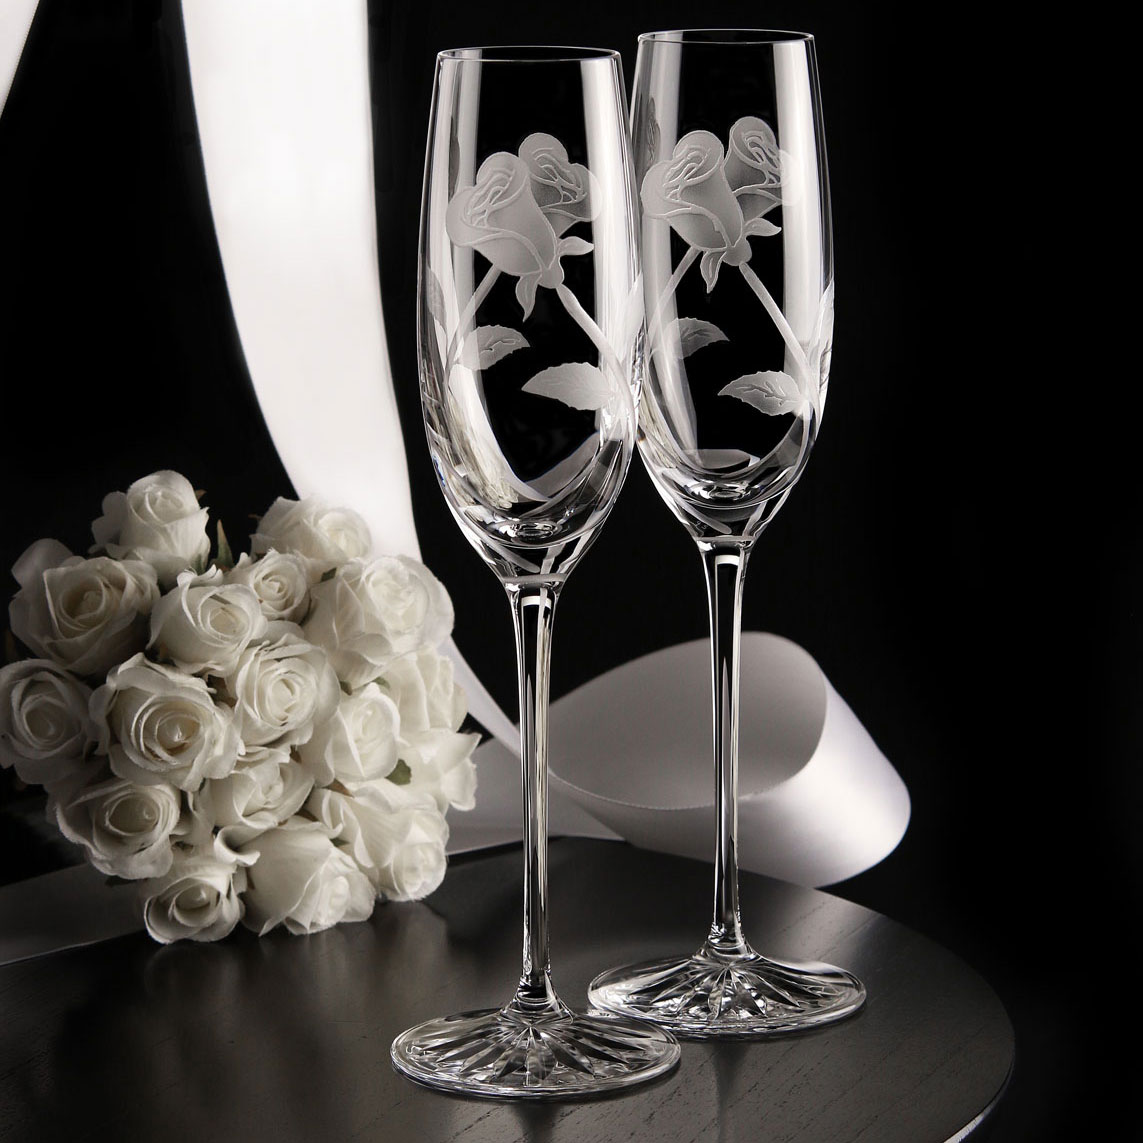 Cashs Ireland, Art Collection Entwined Roses Crystal Flute Pair, Limited Edition